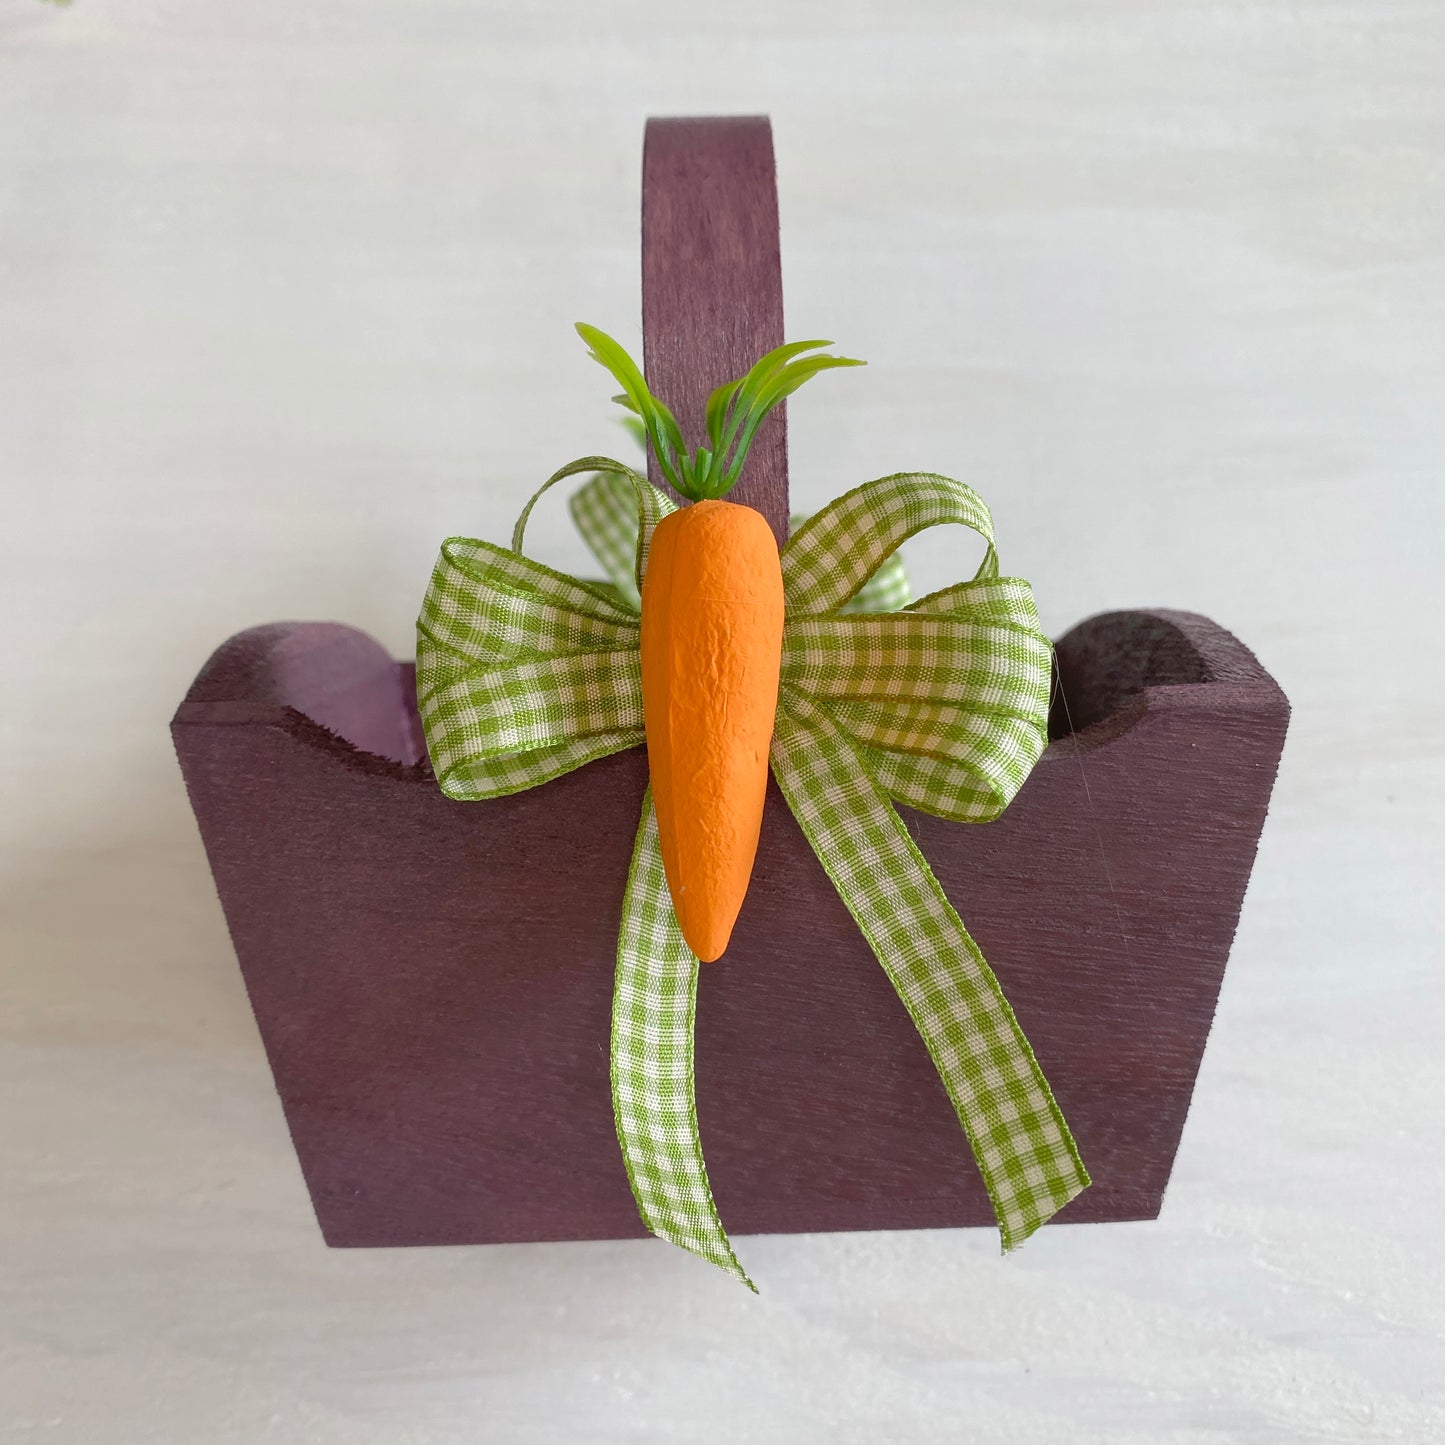 Easter Basket Mini, Cute Easter Wooden Basket with Carrot Decoration.